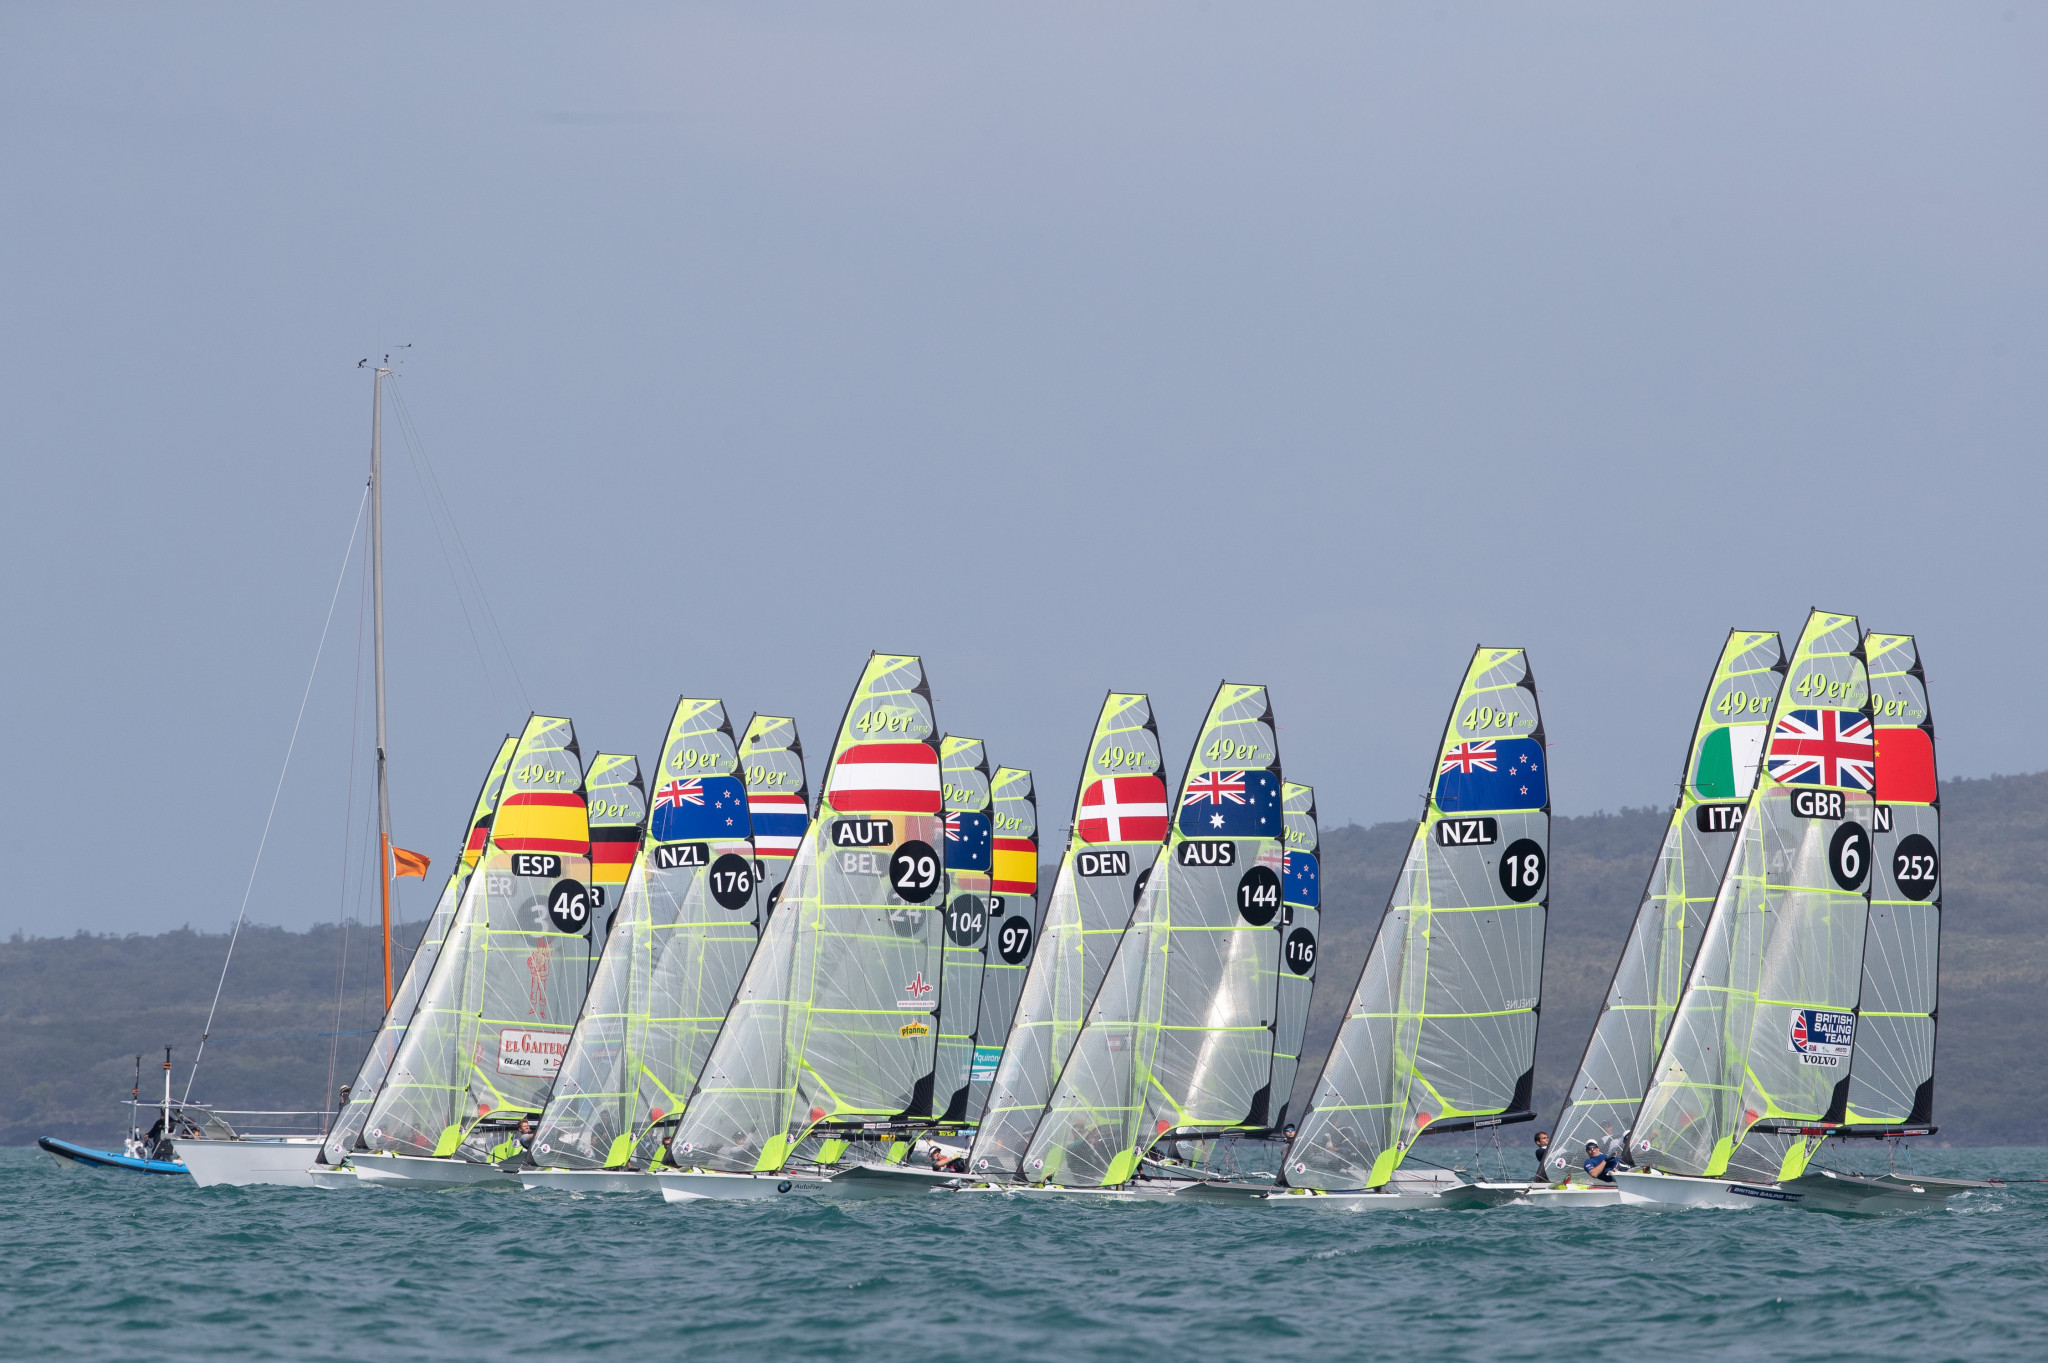 Benjamin Bildstein and David Hussle of Austria lead the 49er event at the Oceania Championships ©Oceania Championships